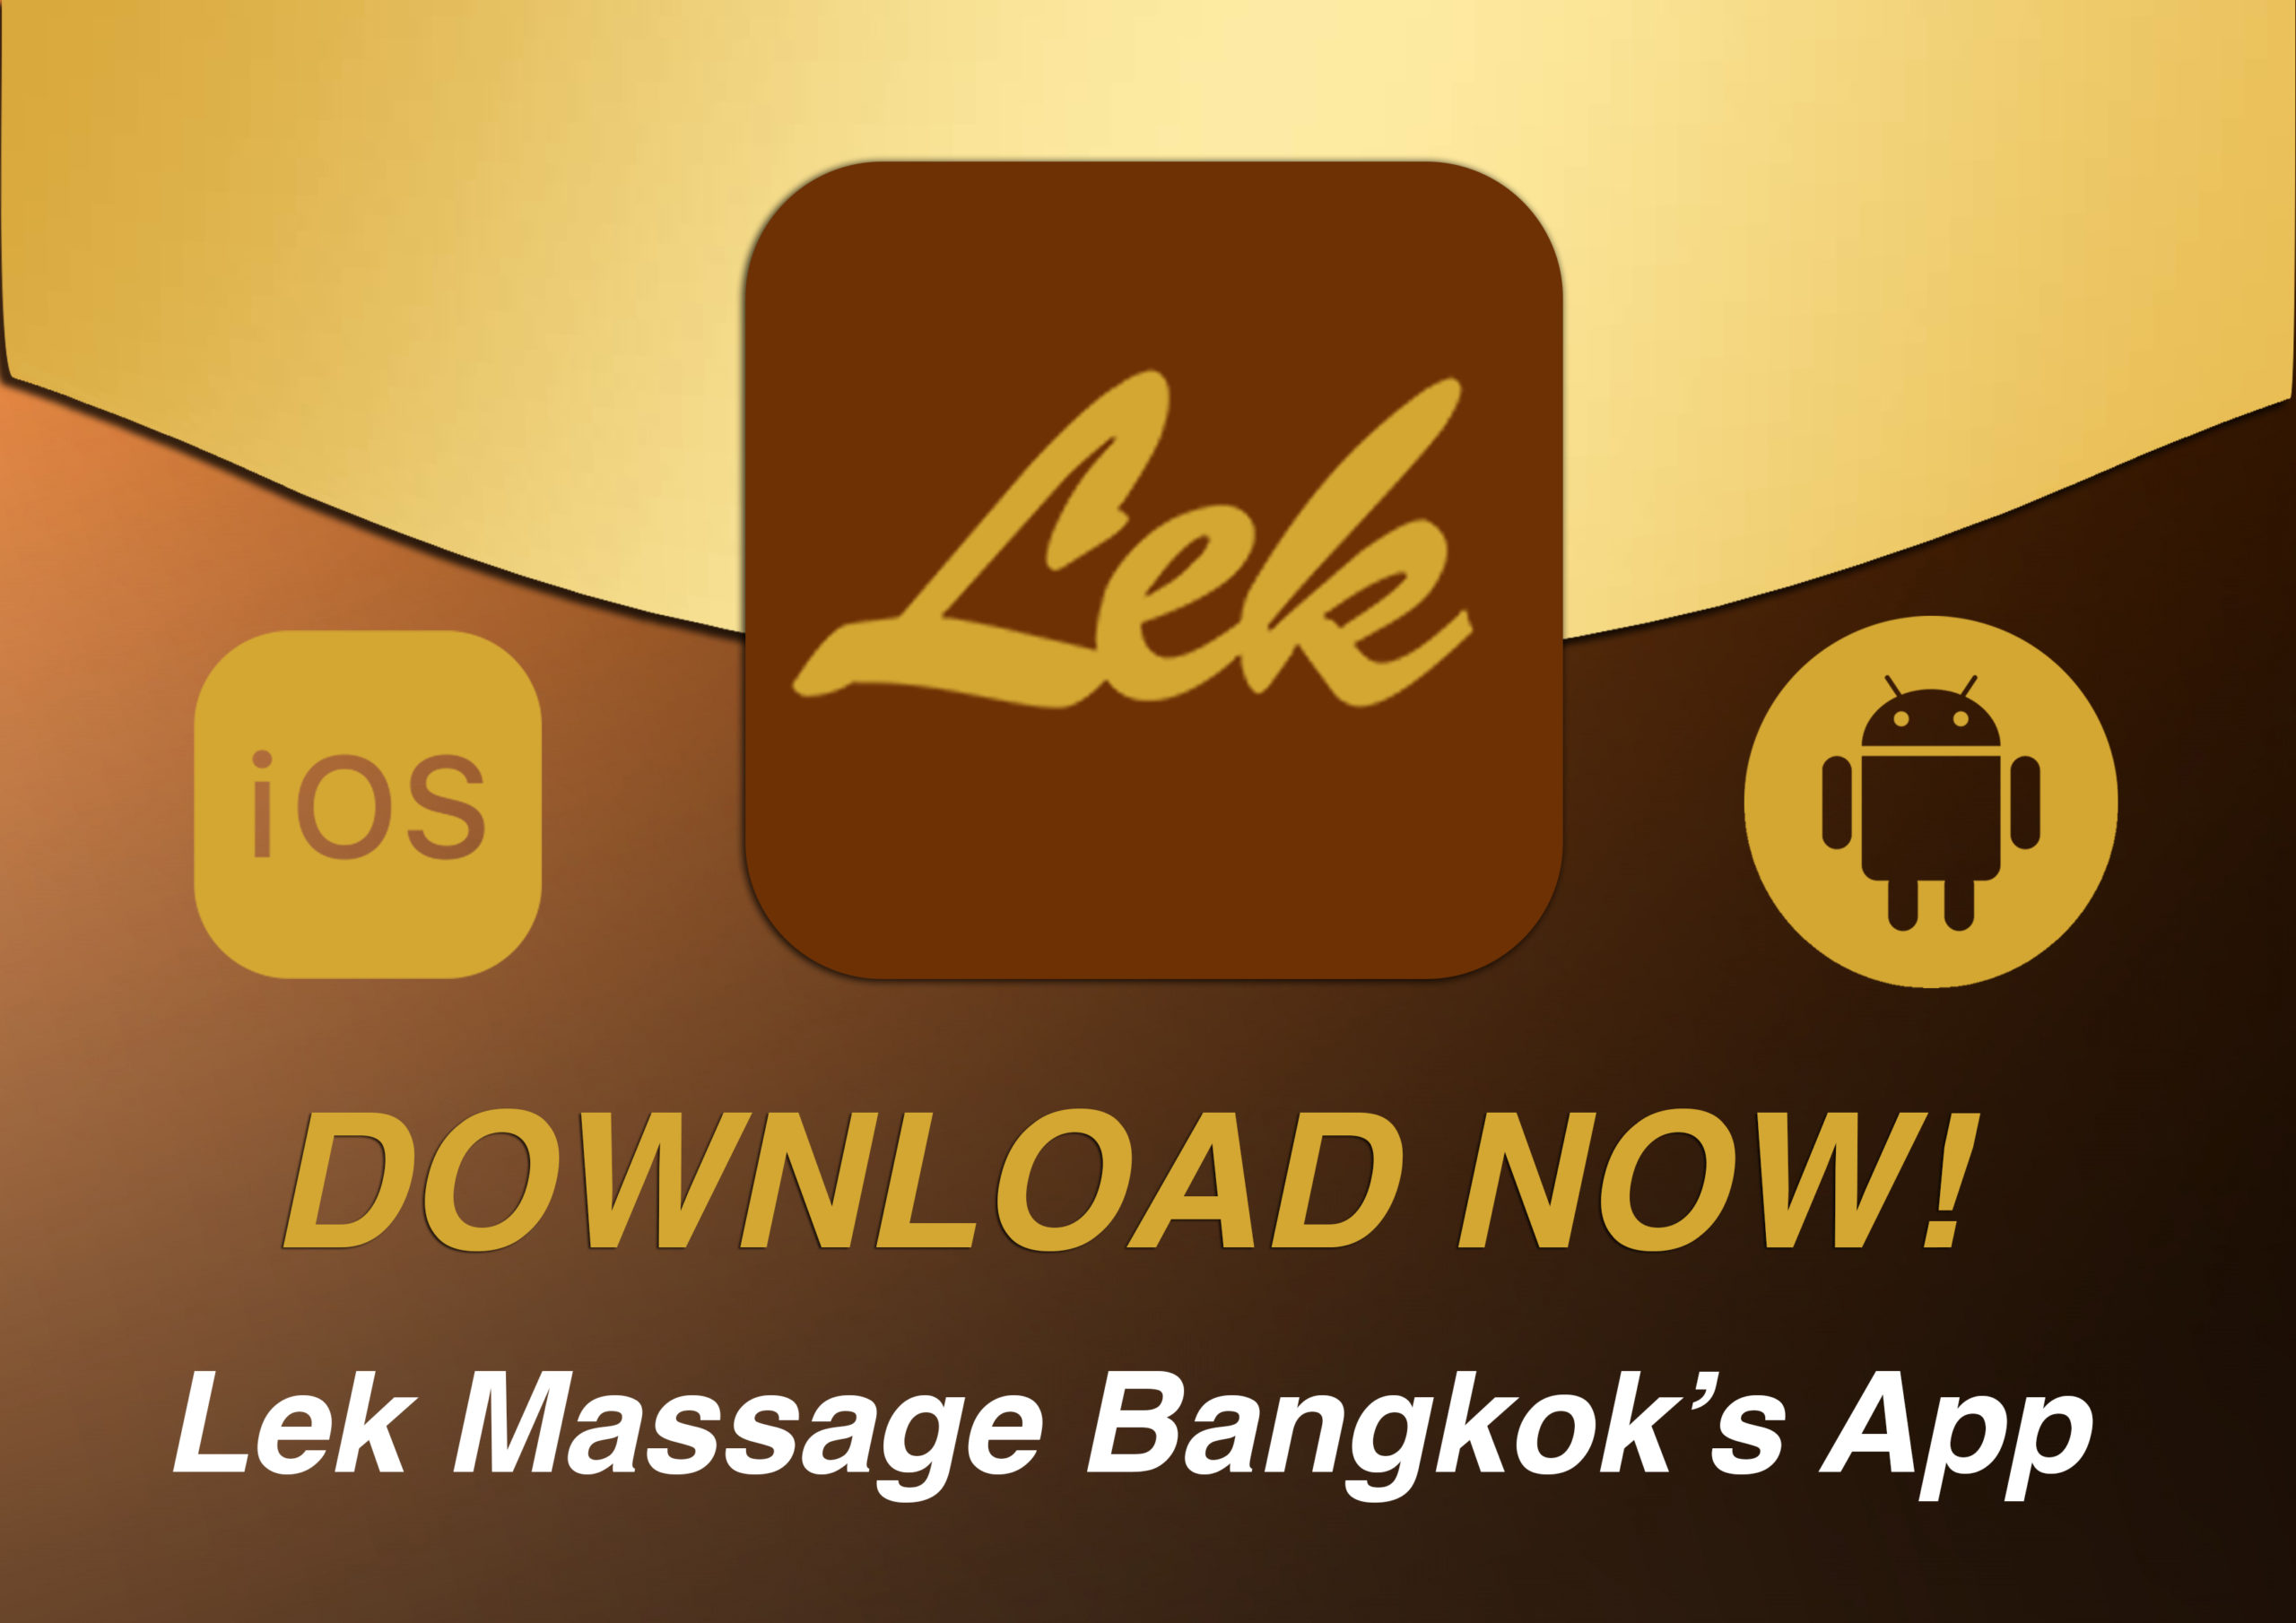 Lek Application Now Available!